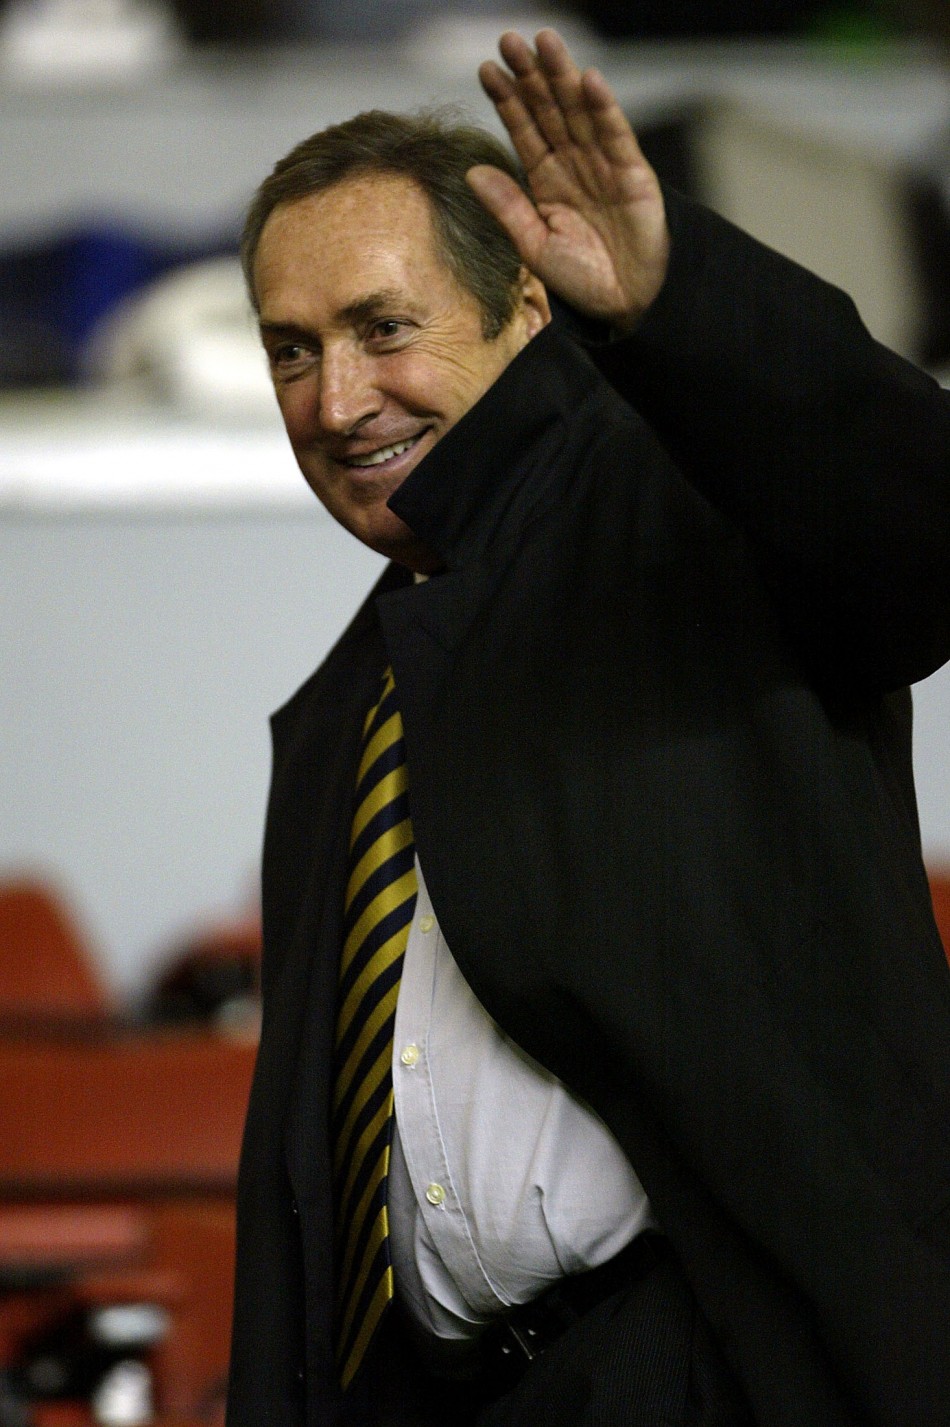 Aston Villa have confirmed the departure of Gerard Houllier as manager after only nine months in charge.